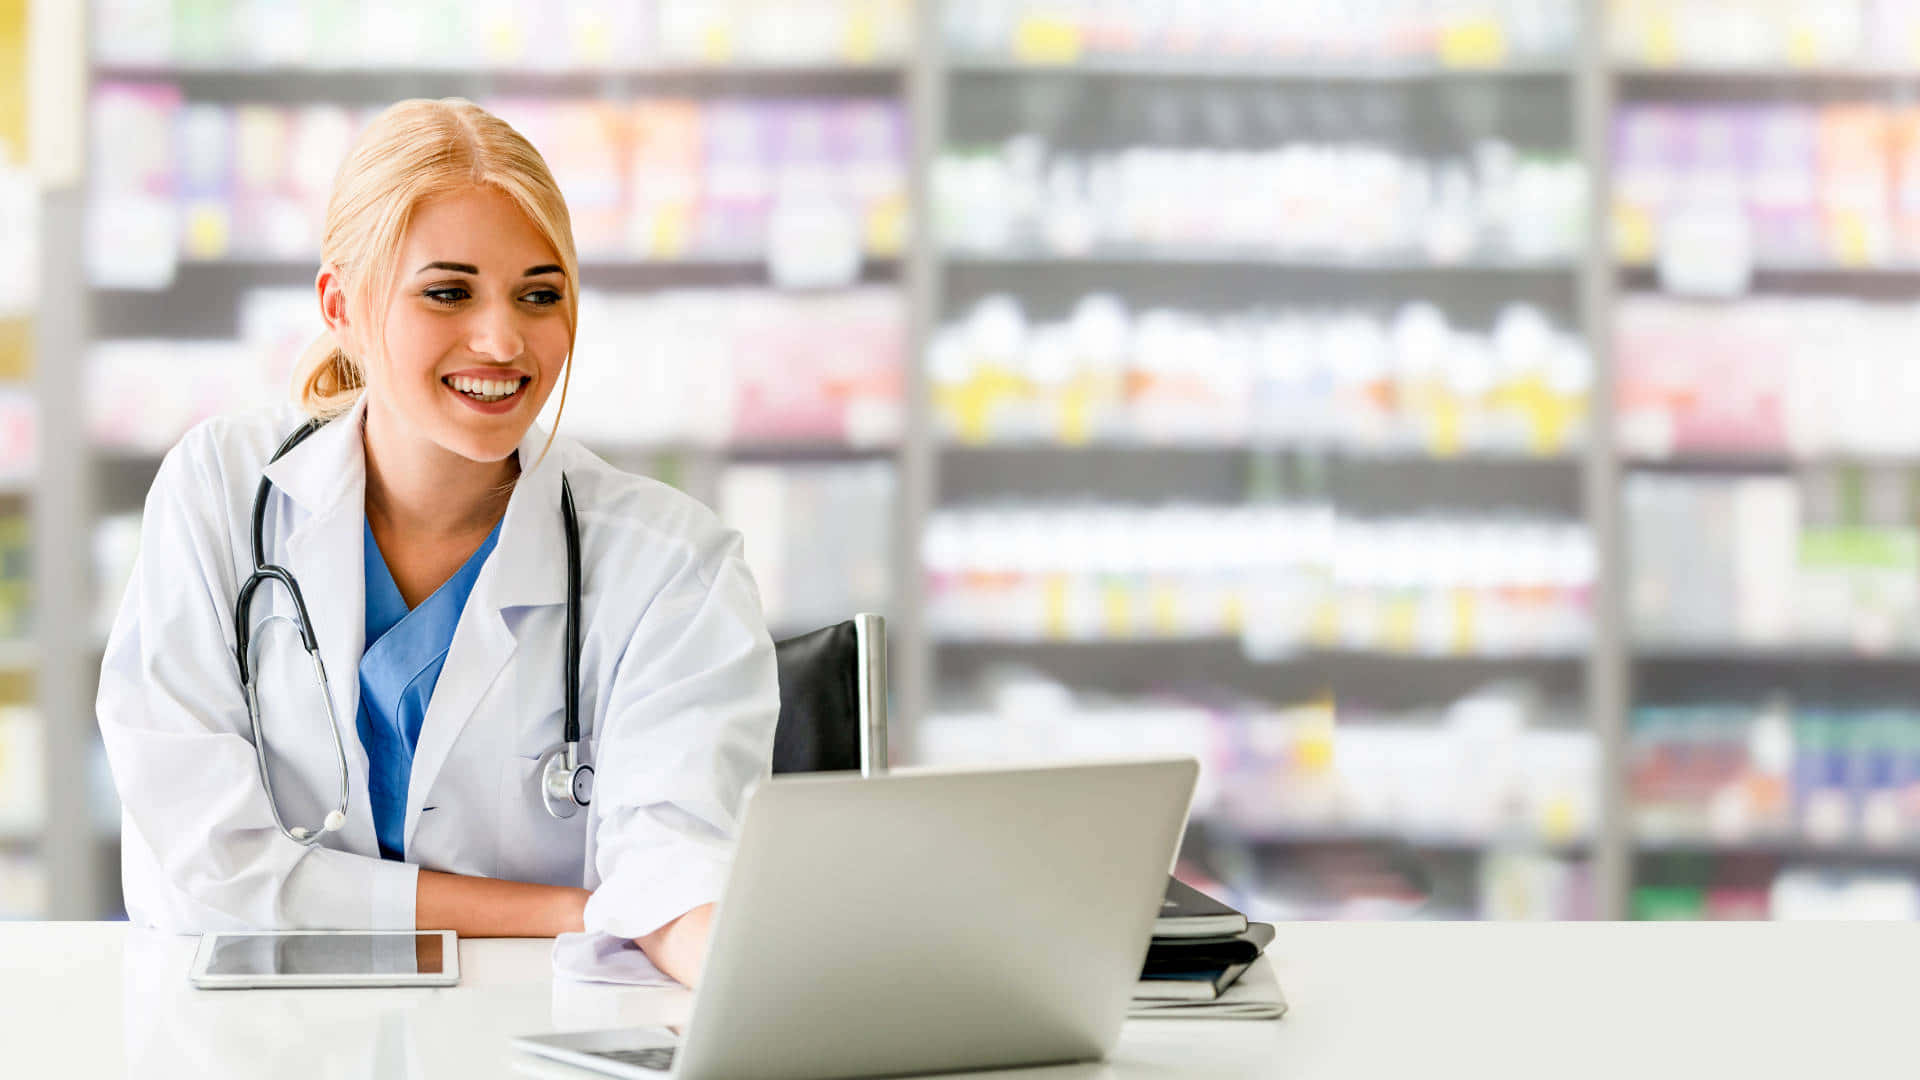 A Female Pharmacist Is Sitting At A Desk With A Laptop